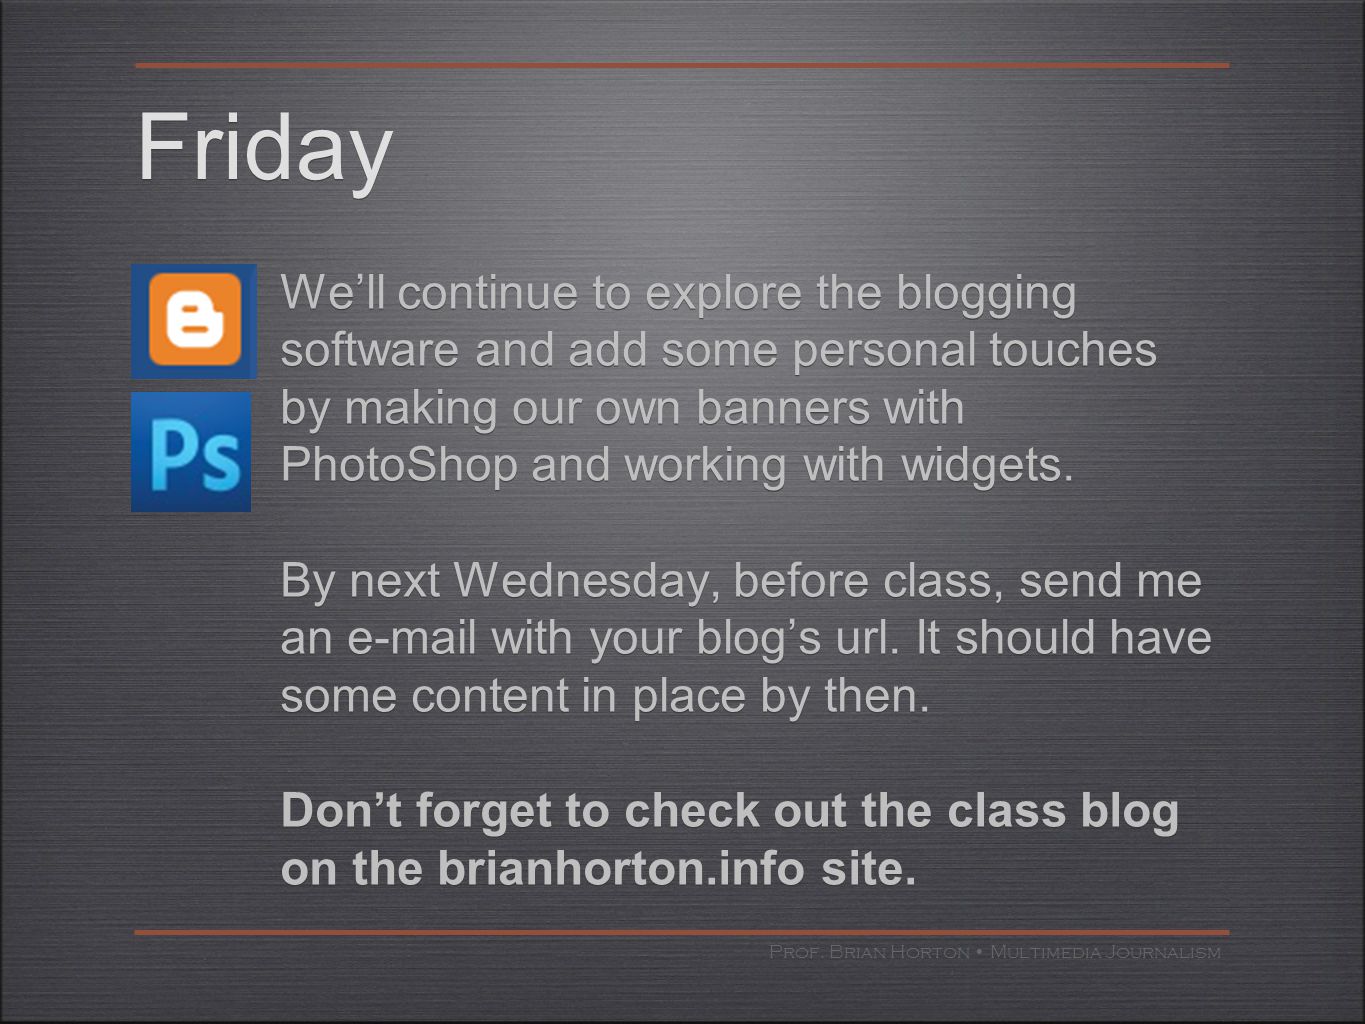 Friday We’ll continue to explore the blogging software and add some personal touches by making our own banners with PhotoShop and working with widgets.